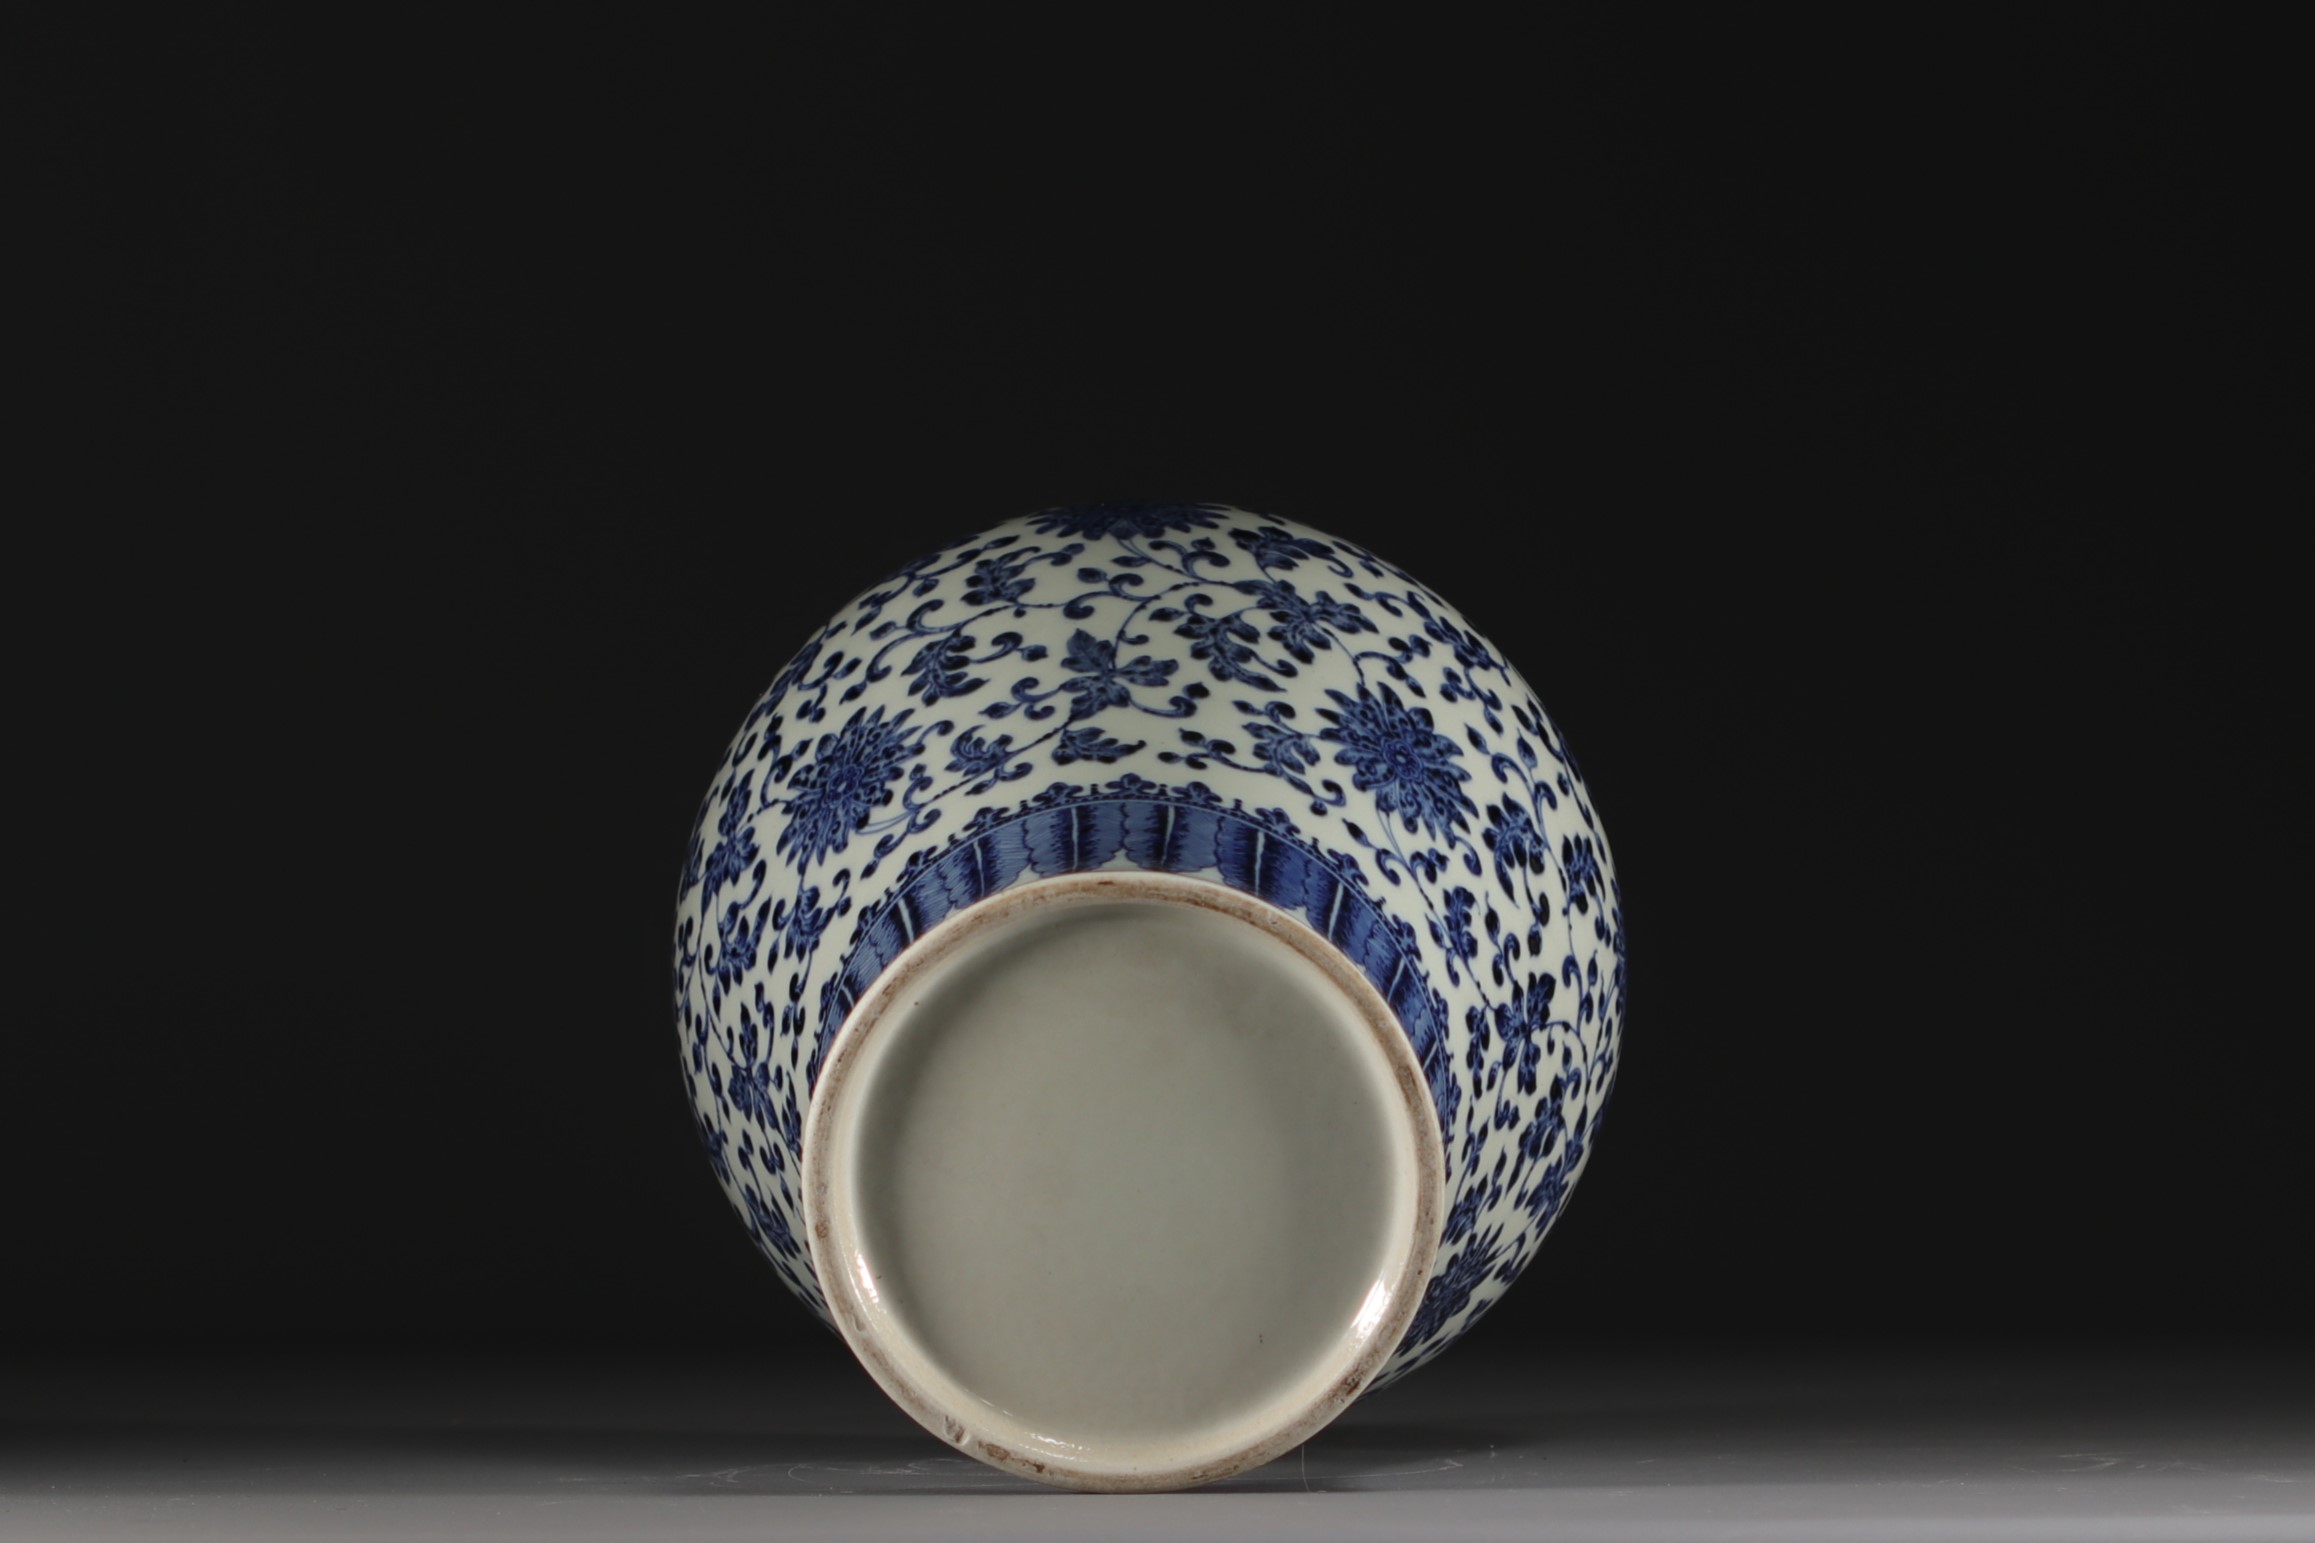 China - A blue and white Meiping vase with floral and banana leaf decoration, Qing period. - Image 4 of 5